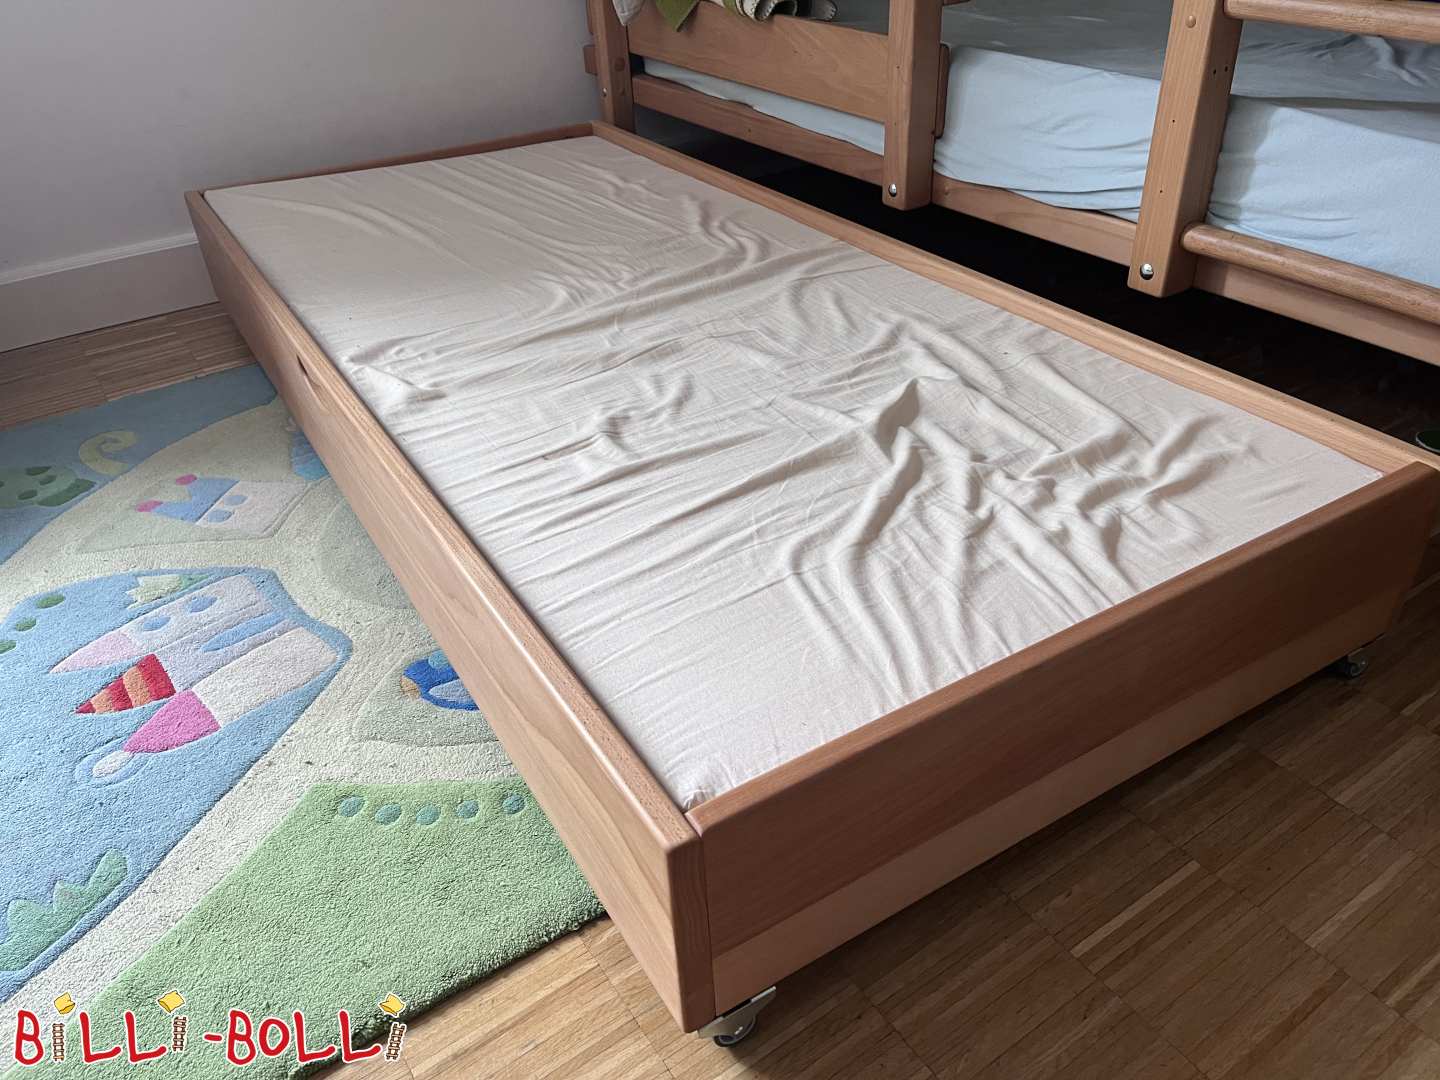 Bed box bed in 80 x 180 cm for mattress length above 200 cm (Category: Accessories/extension parts pre-owned)